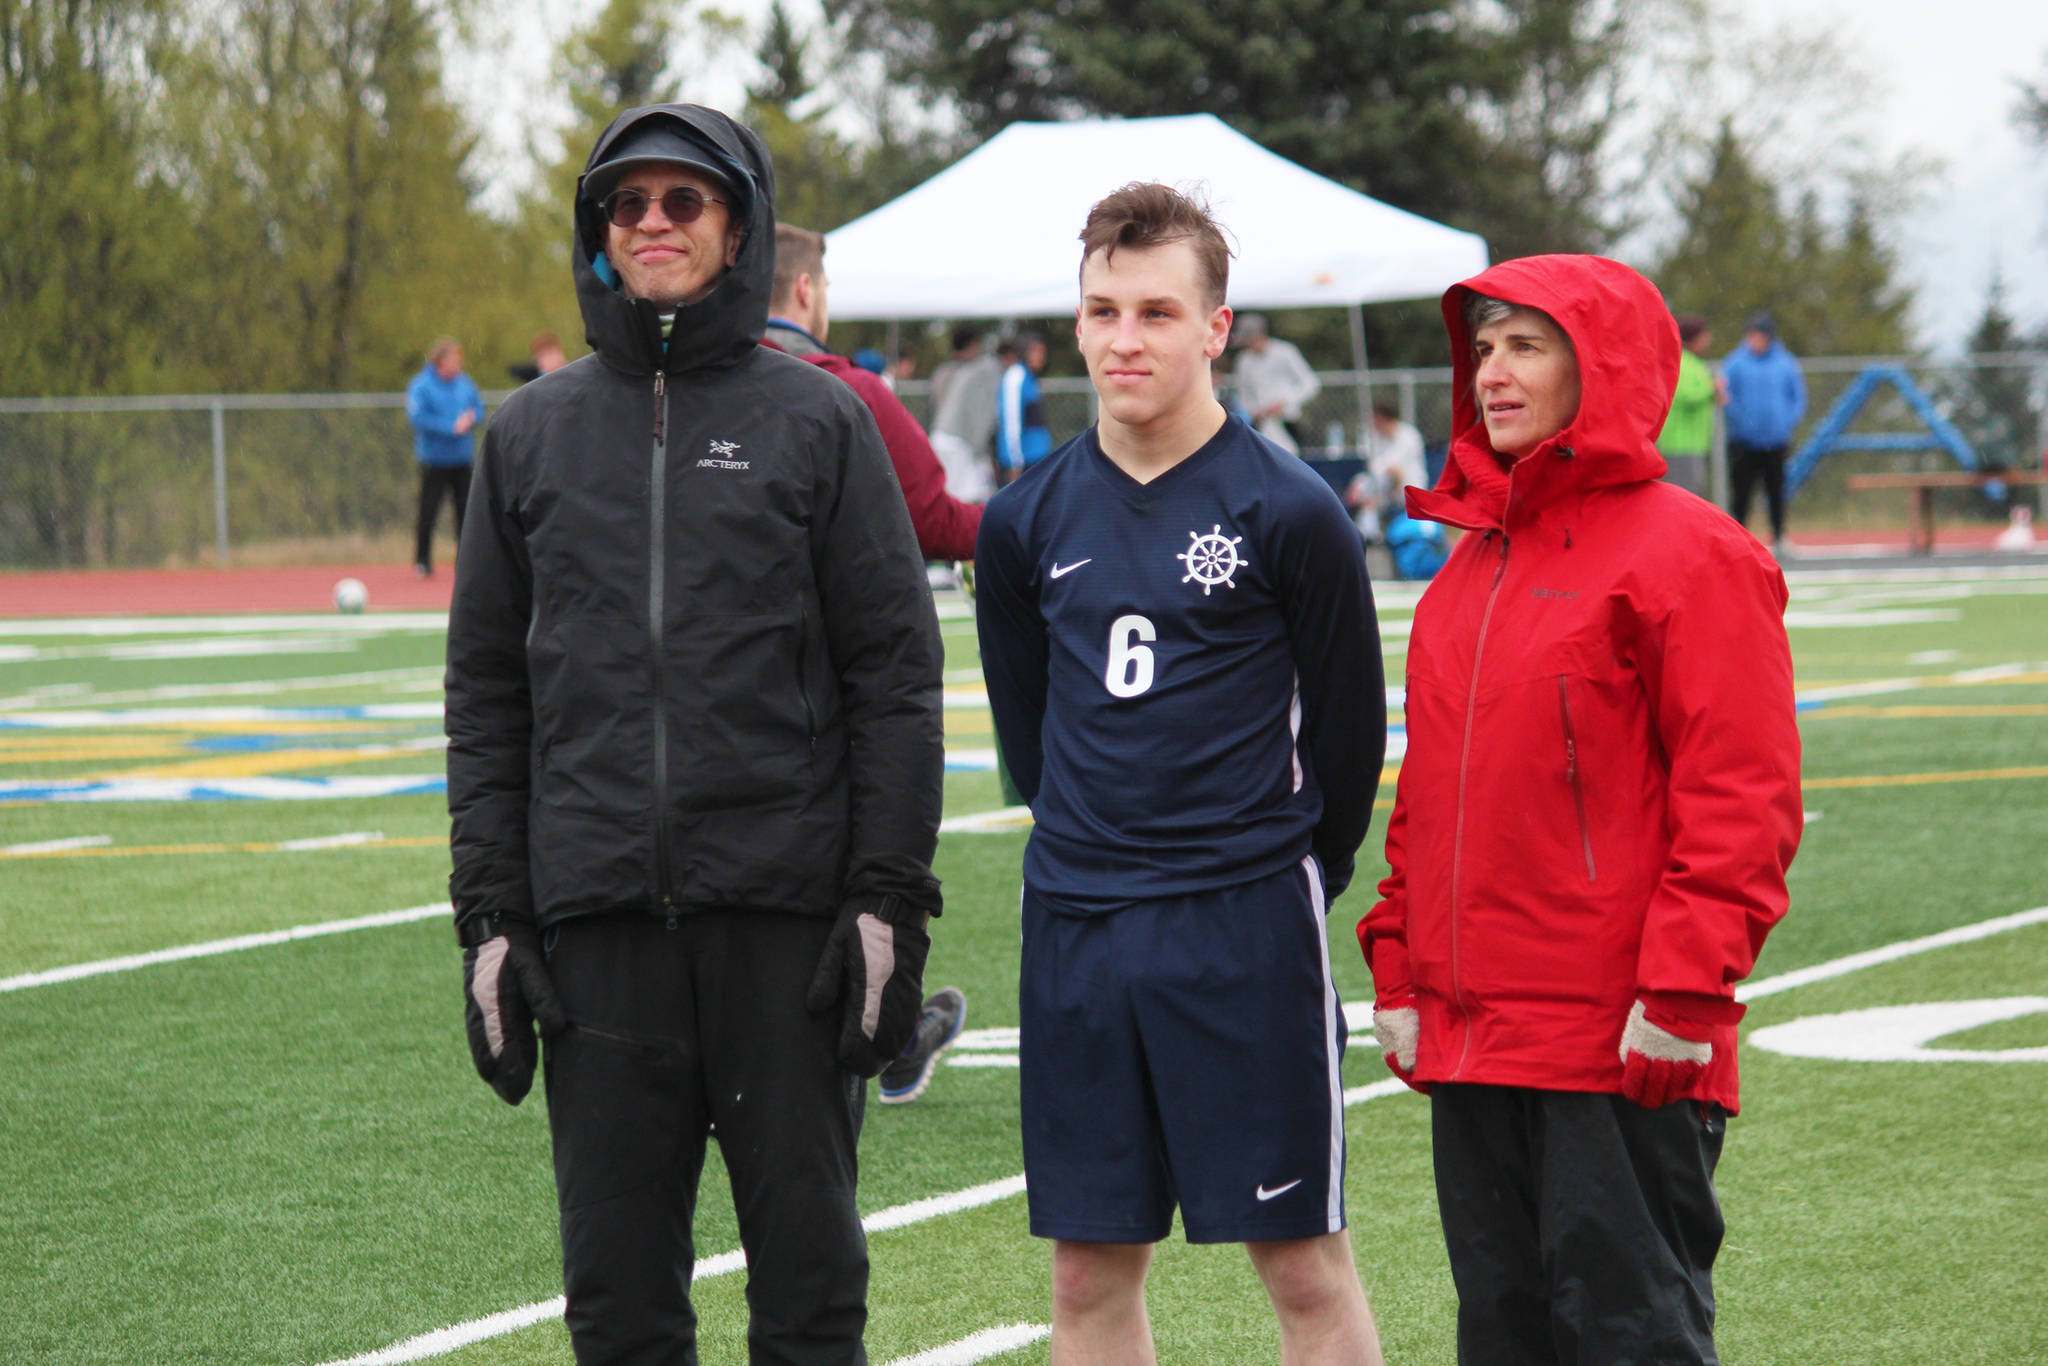 Forward Tom Gorman standing with his parents to be recognized during a Sneior Night celebration between the boys and girls soccer games held Friday, May 10, 2019 at Homer High School in Homer, Alaska. (Photo by Megan Pacer/Homer News)